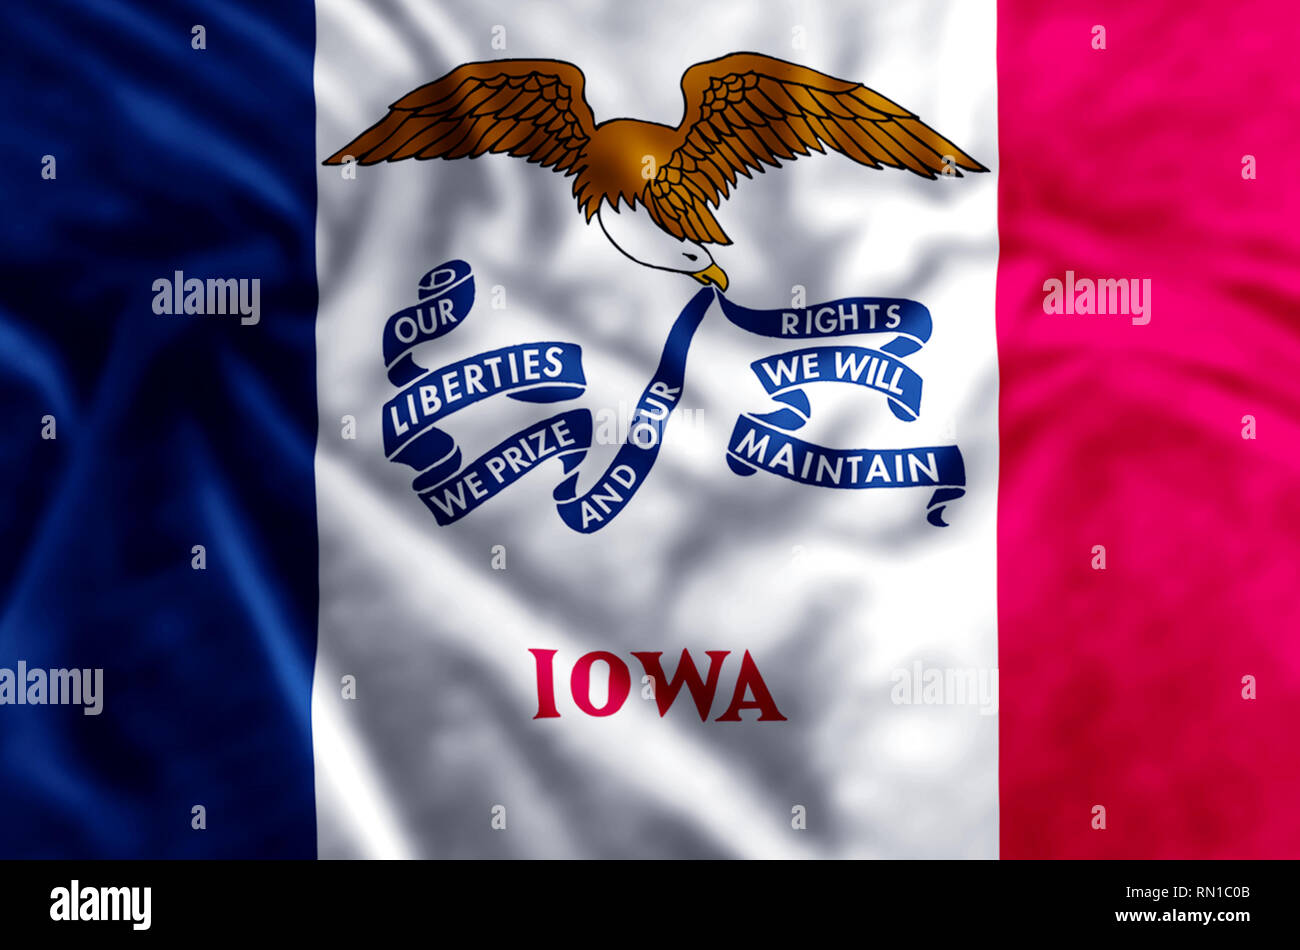 Iowa Stylish Waving And Closeup Flag Illustration Perfect For Background Or Texture Purposes 6760